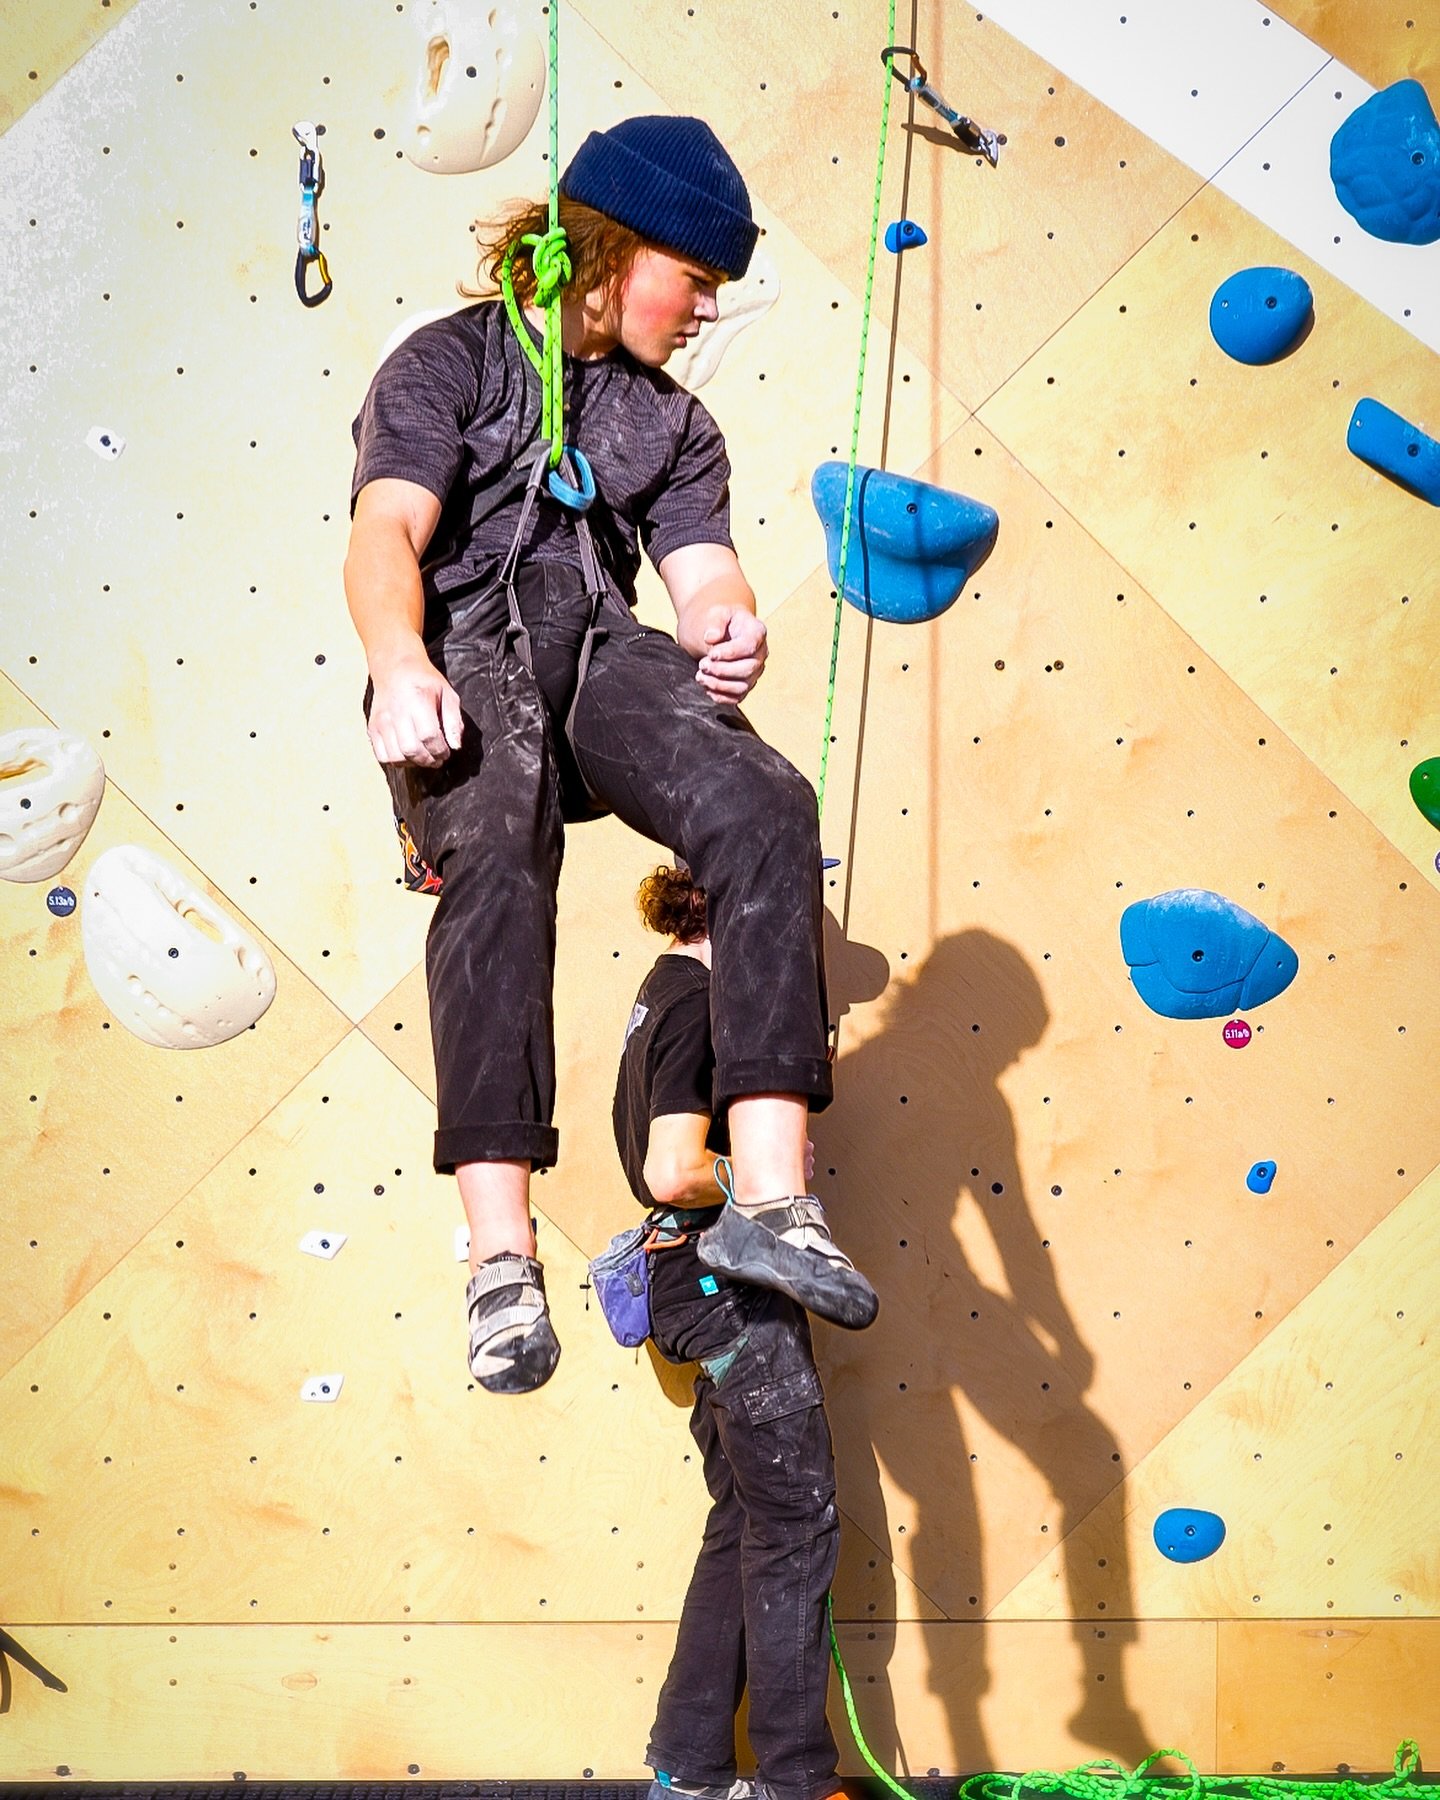 Get certified to belay today and sign up for our Belay Basics class. Participants will learn the skills to belay and top rope safely and efficiently. Sign up today!